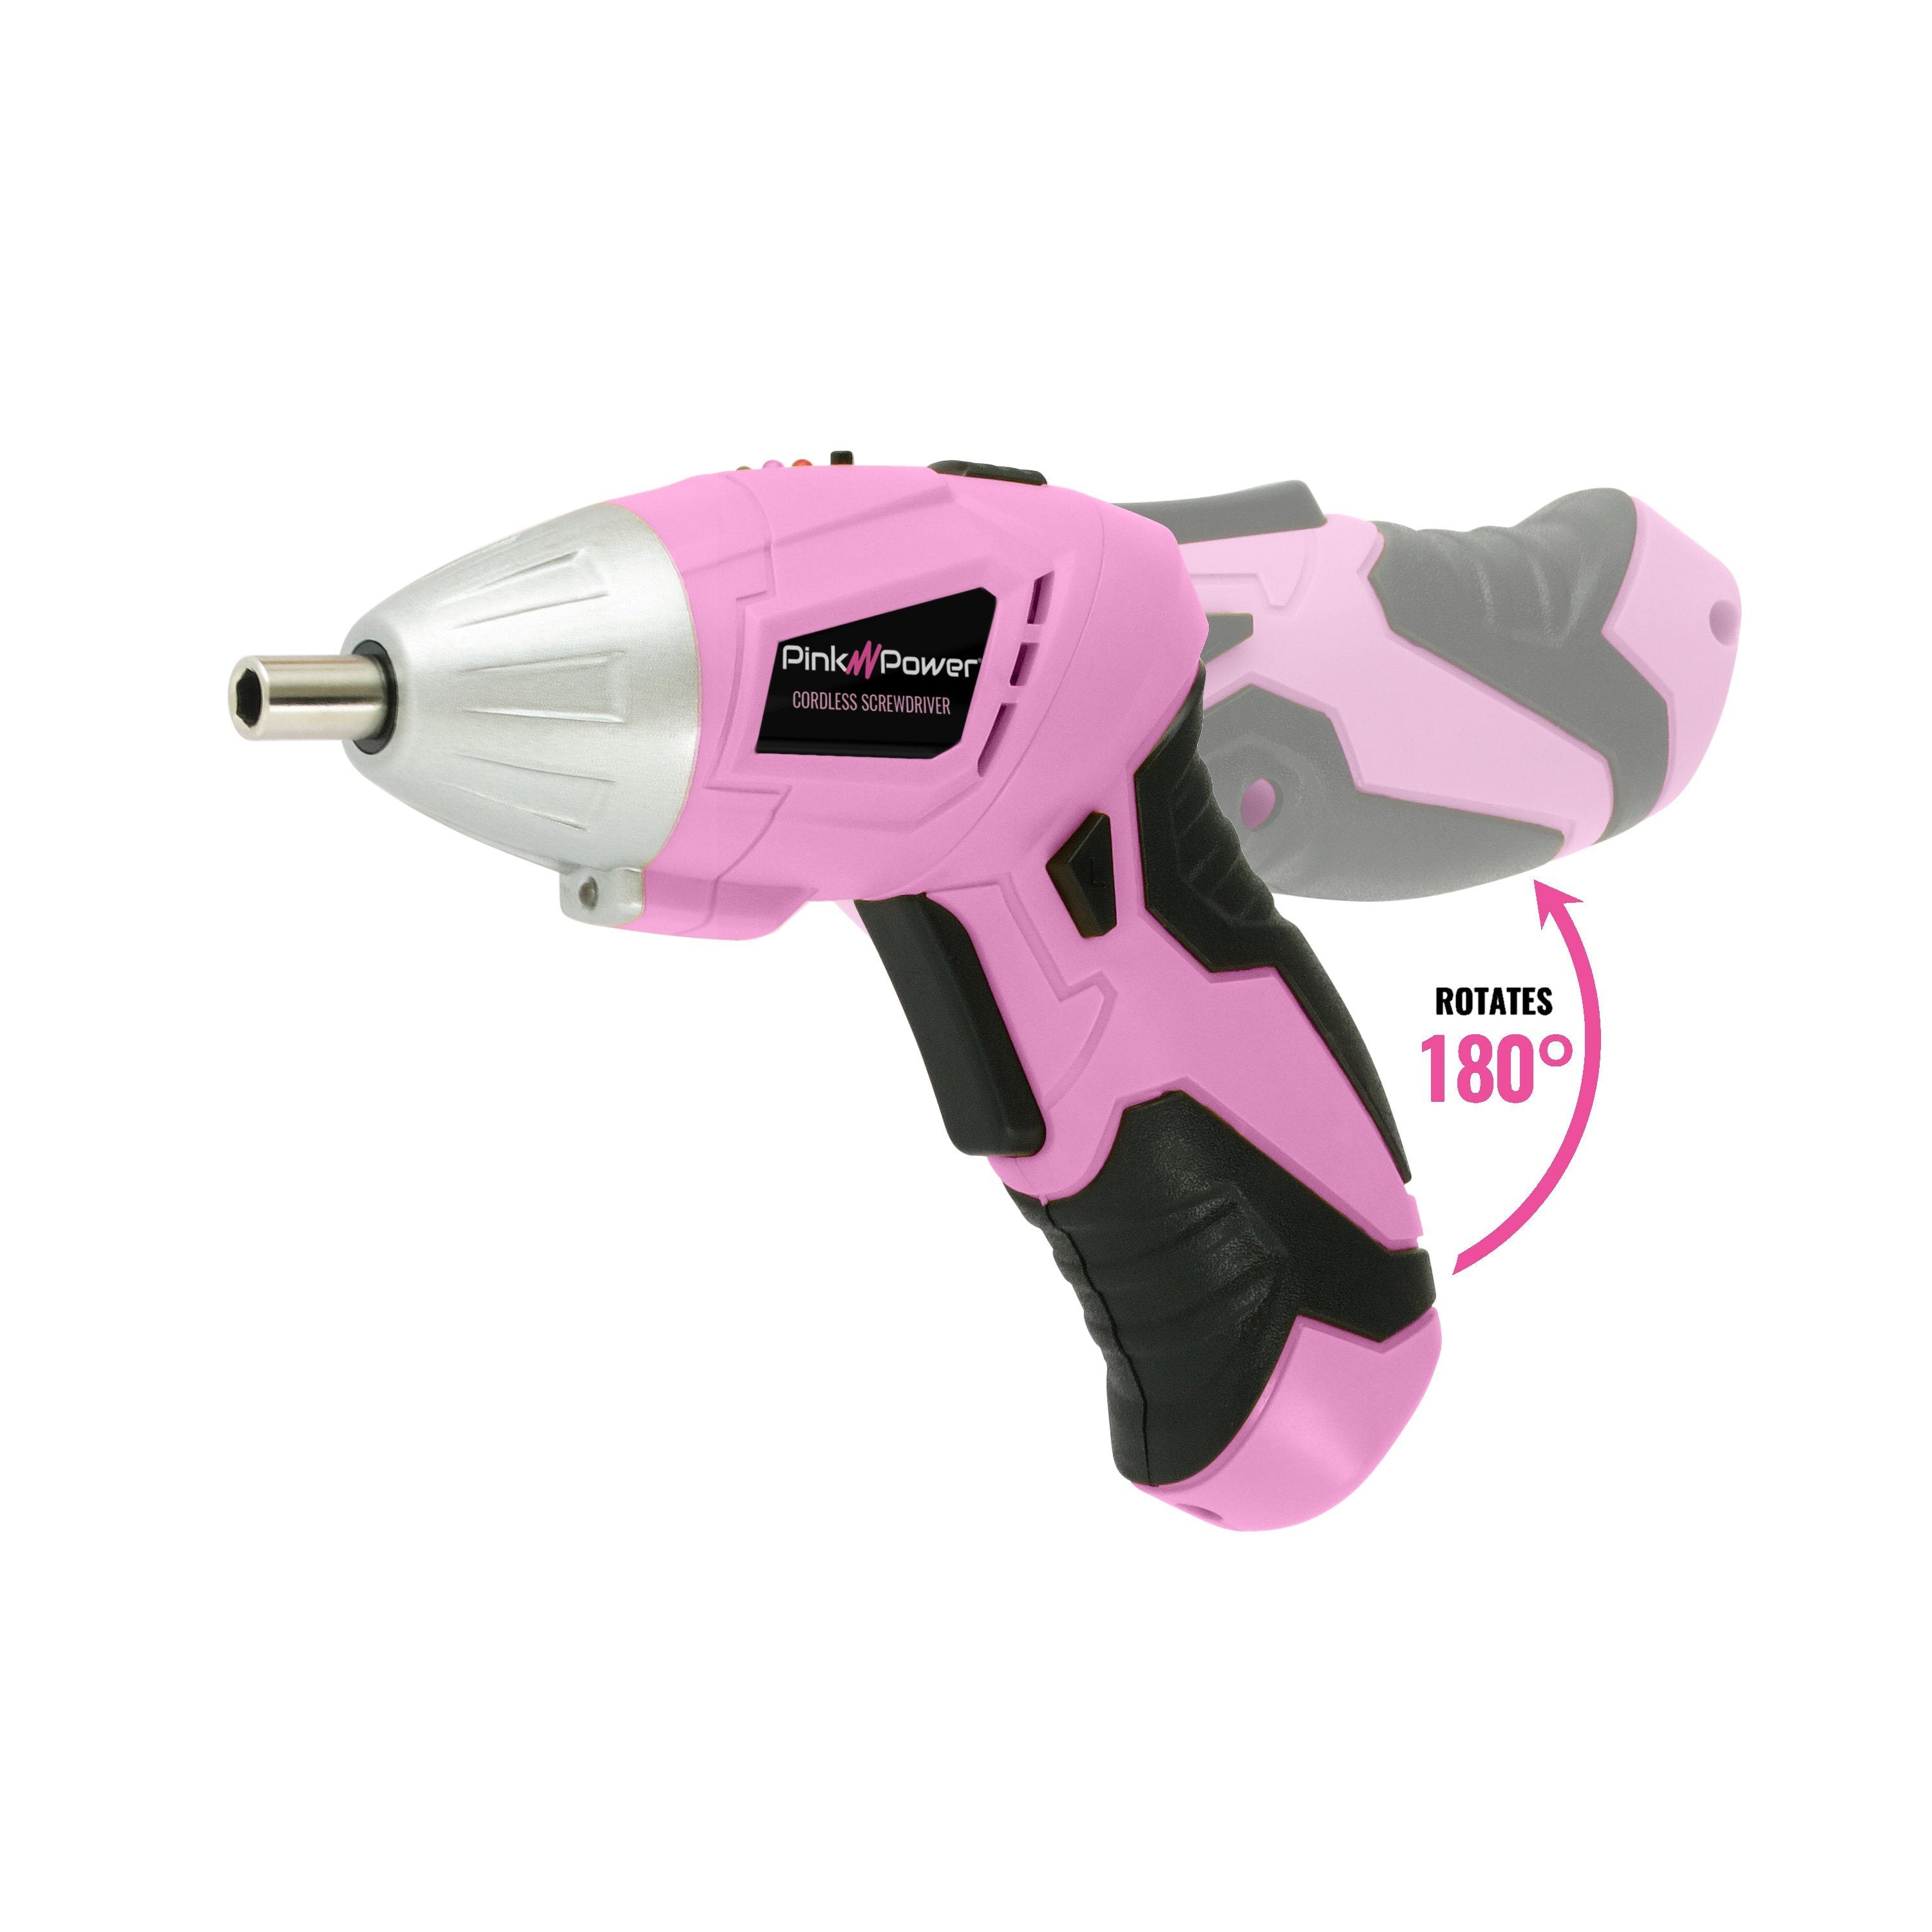 Bielmeier Pink Electric Screwdriver Kit 5N.m, 4V Lithium Ion Battery Cordless Screwdriver Rechargeable with LED Light and USB C